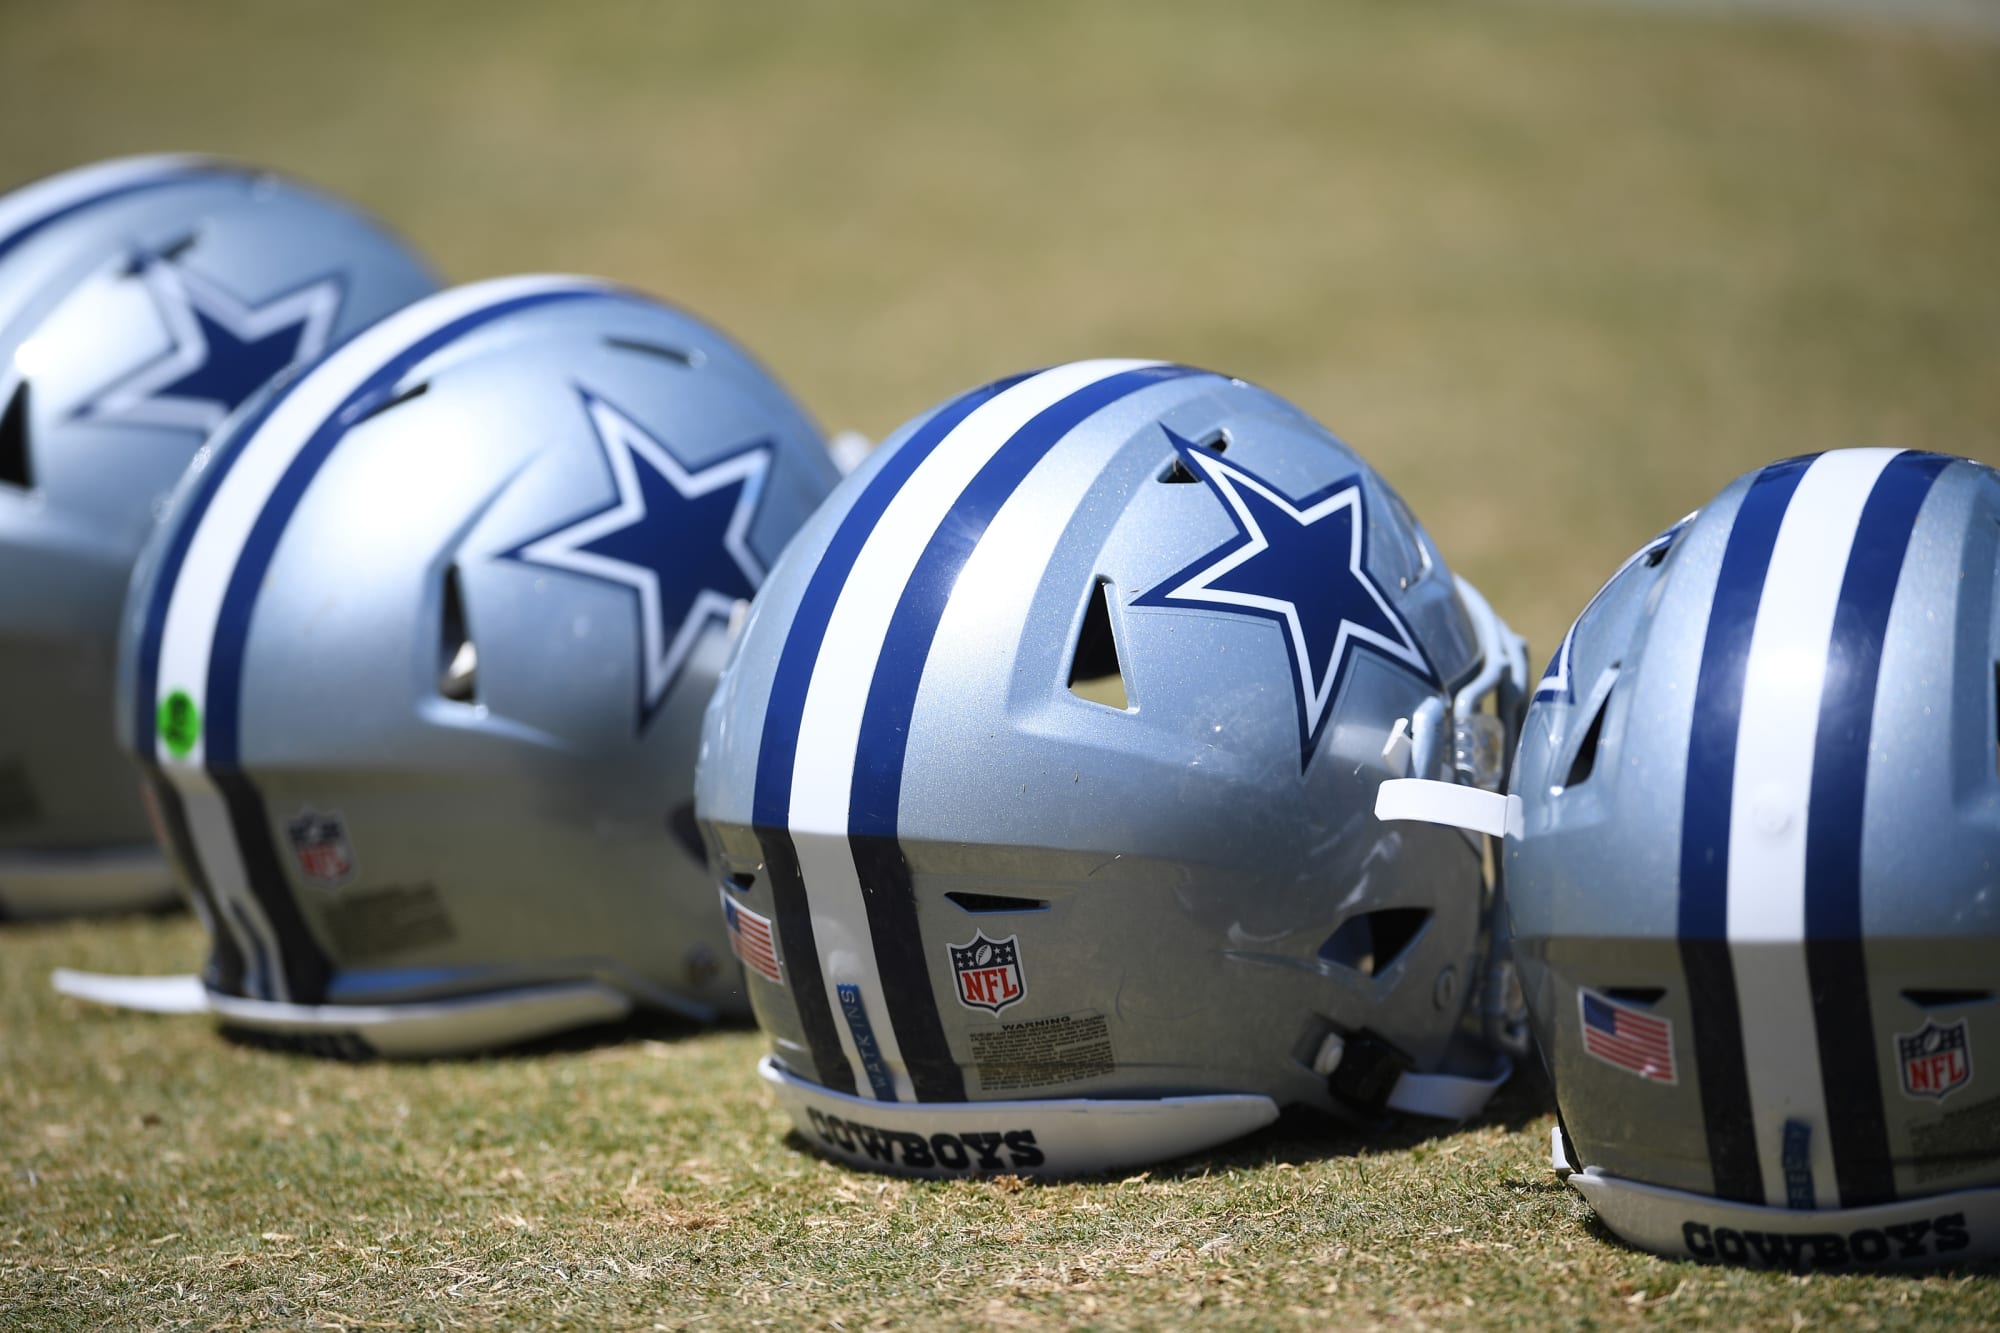 Mattress Mack' puts $2 million bet on Cowboys to beat 49ers in NFC